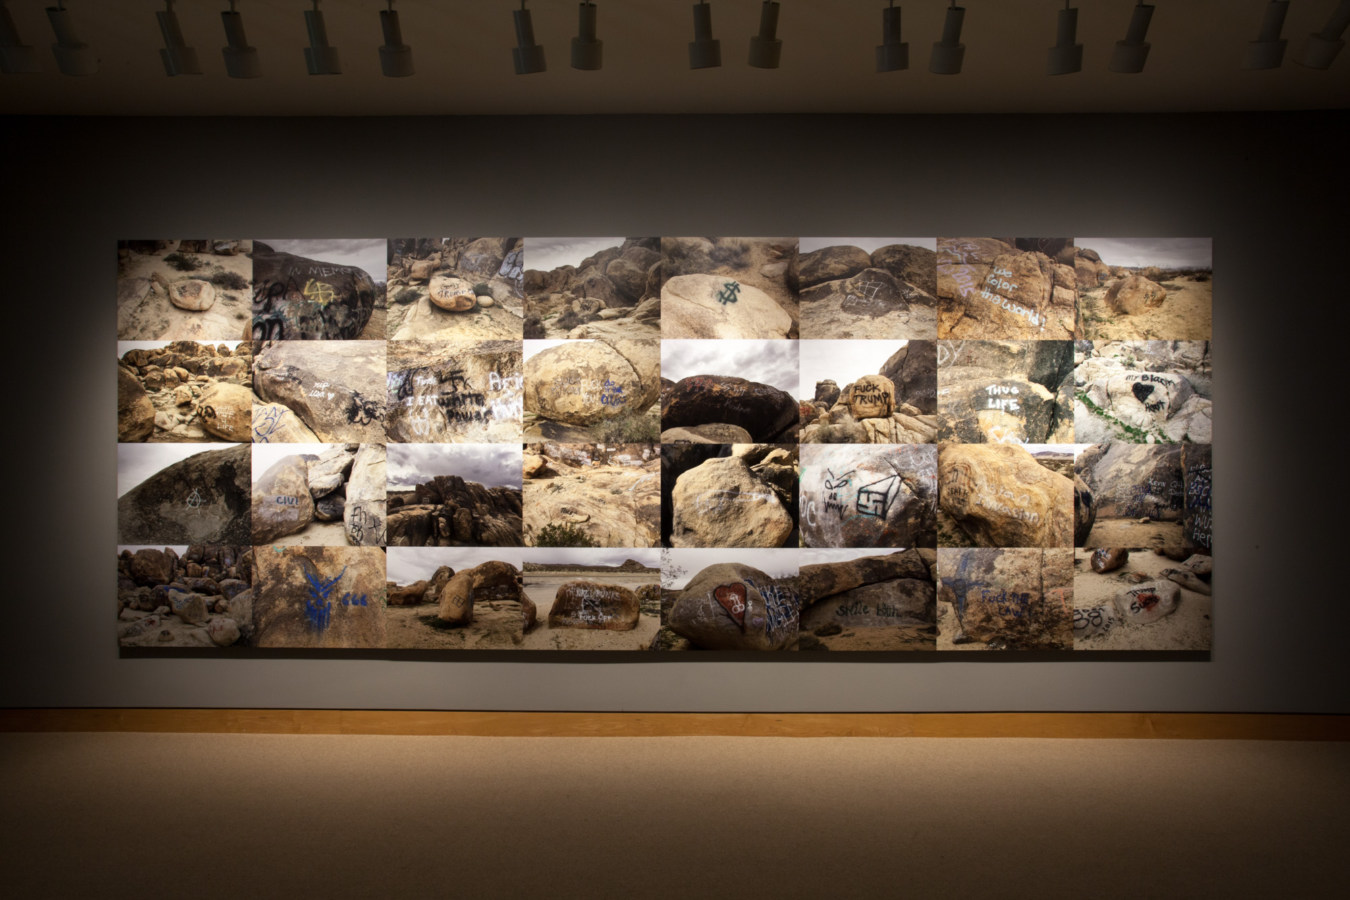 Color image of large scale gridded photographs depicting various graffiti markings on various rocks and boulders